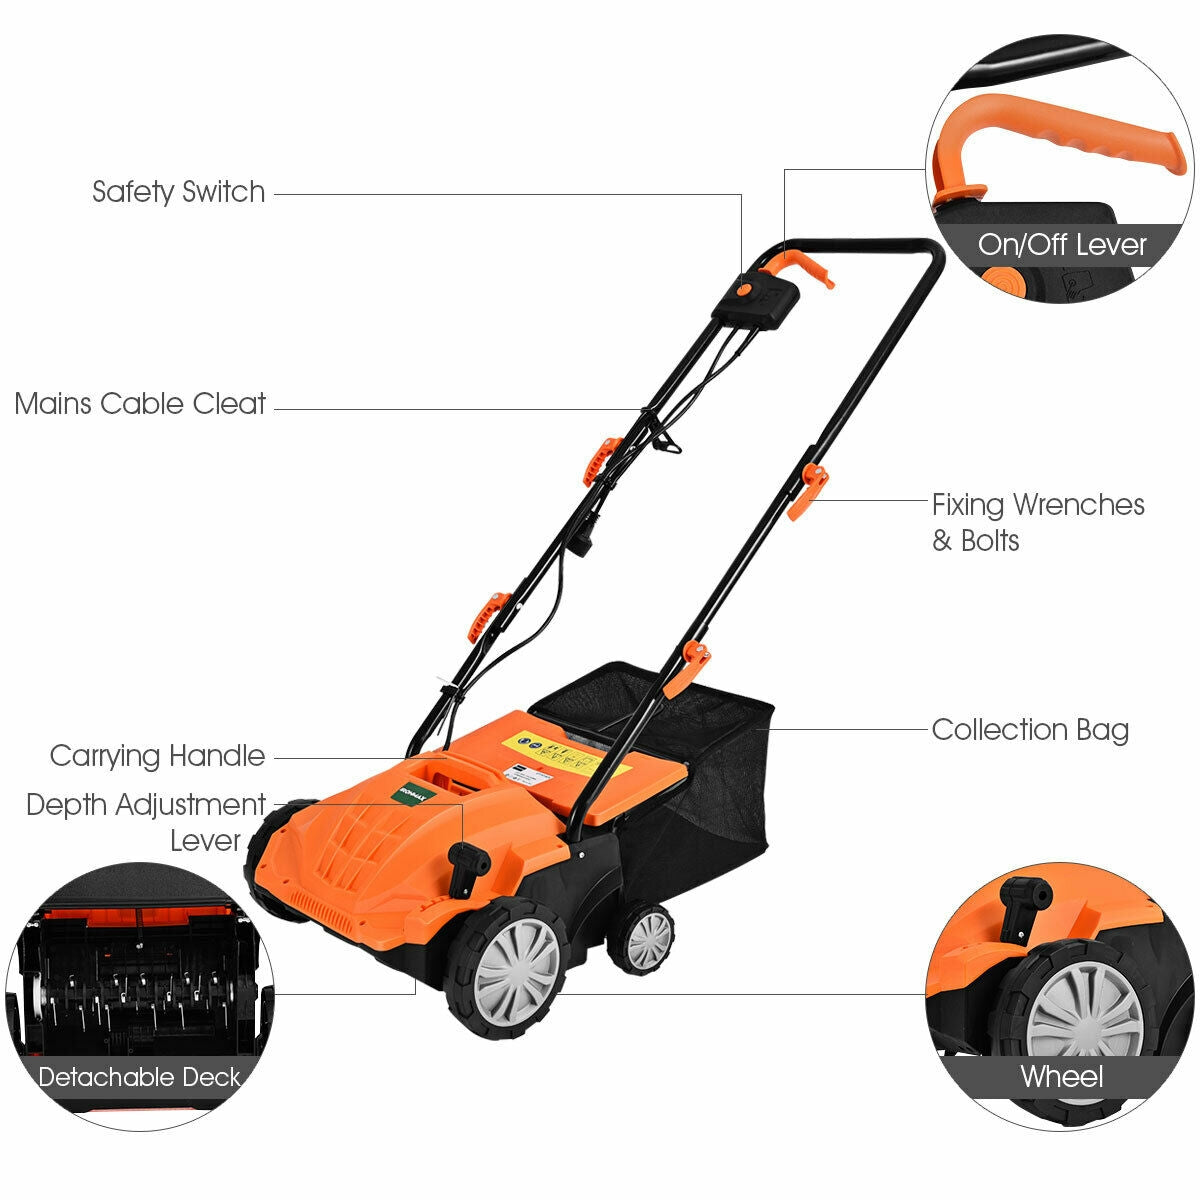 13 Inch 12 Amp Electric Scarifier with Collection Bag and Removable Blades - Gallery View 5 of 12